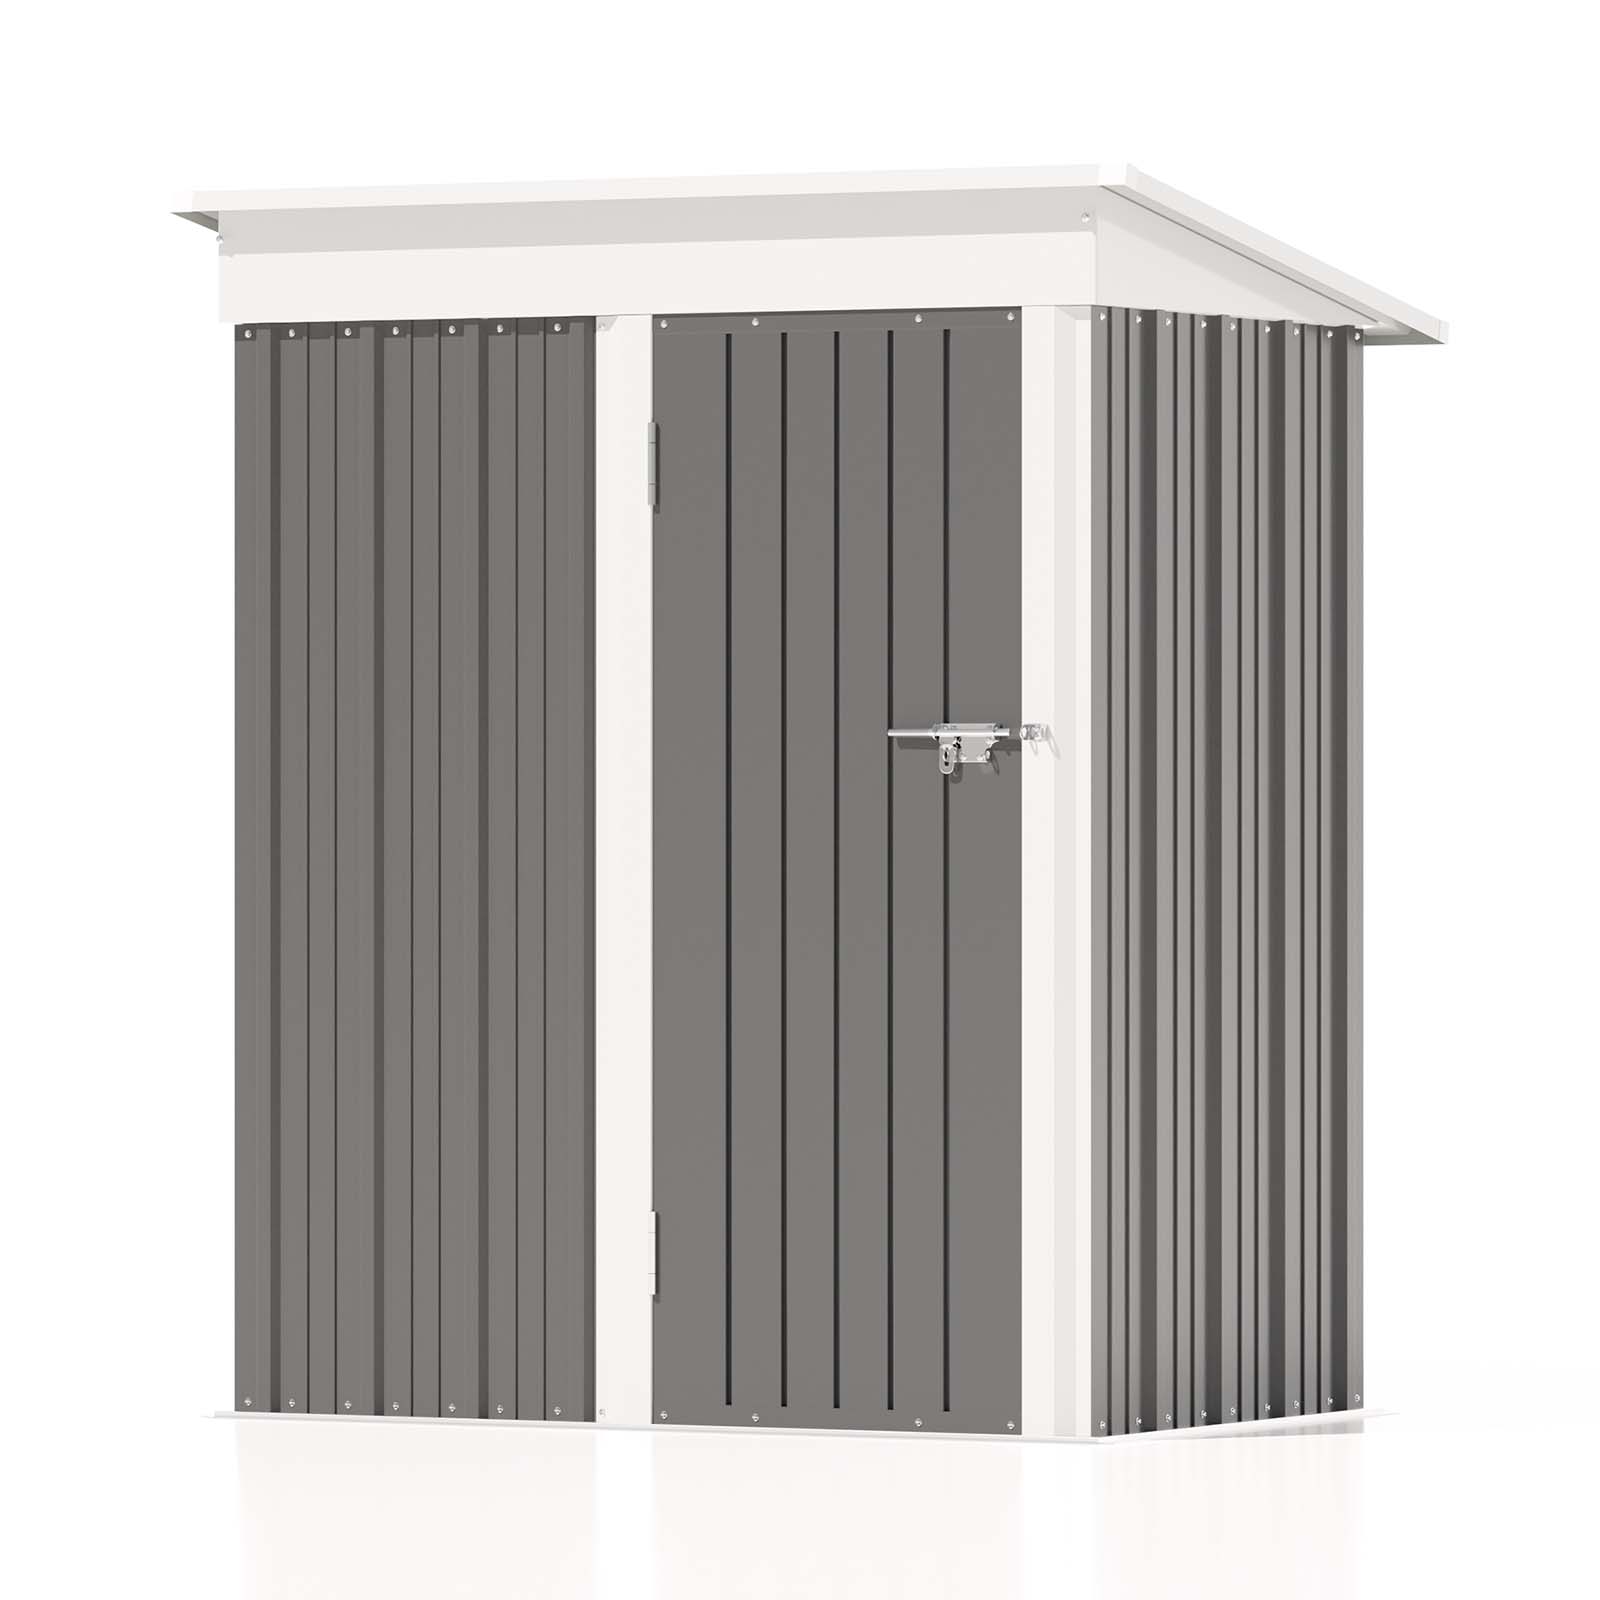 Patiowell 5x3 Metal Shed-Cool Gray